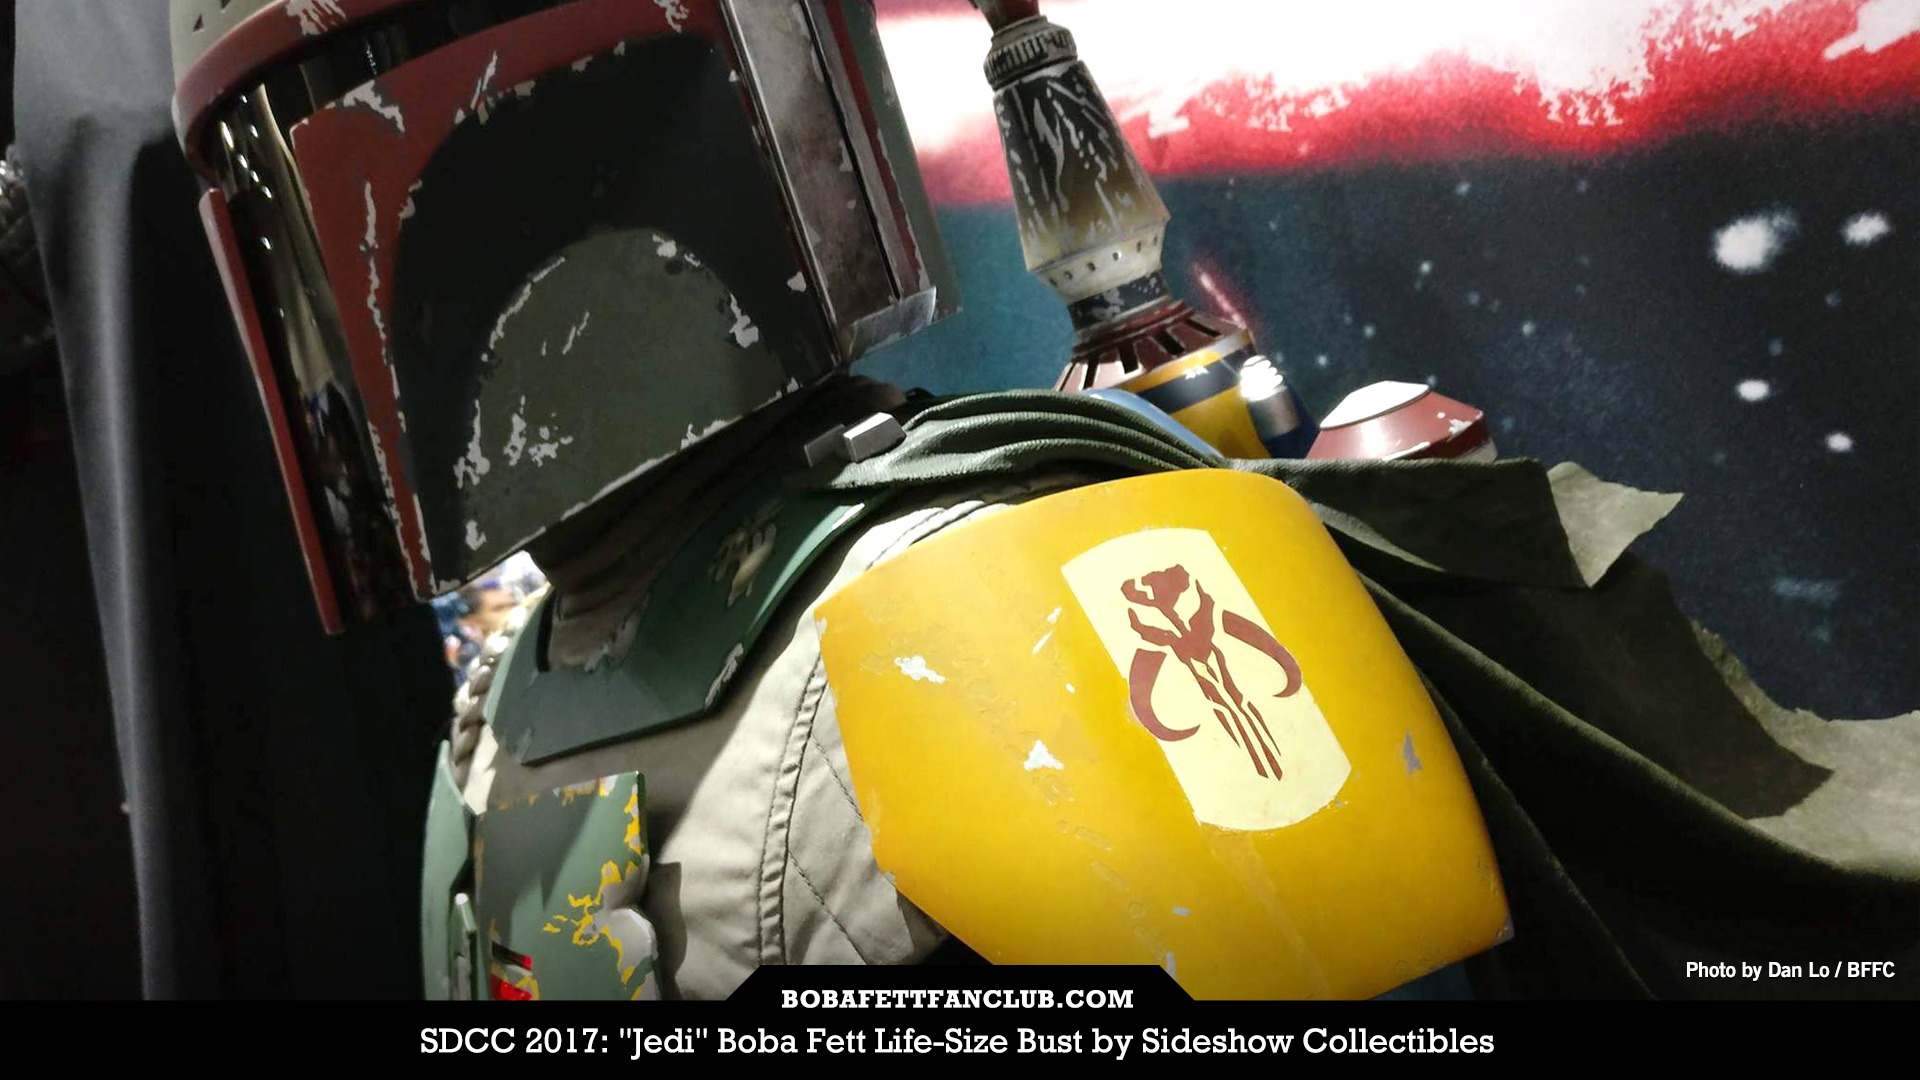 sideshow-collectibles-boba-fett-life-size-bust-1500521293.jpg